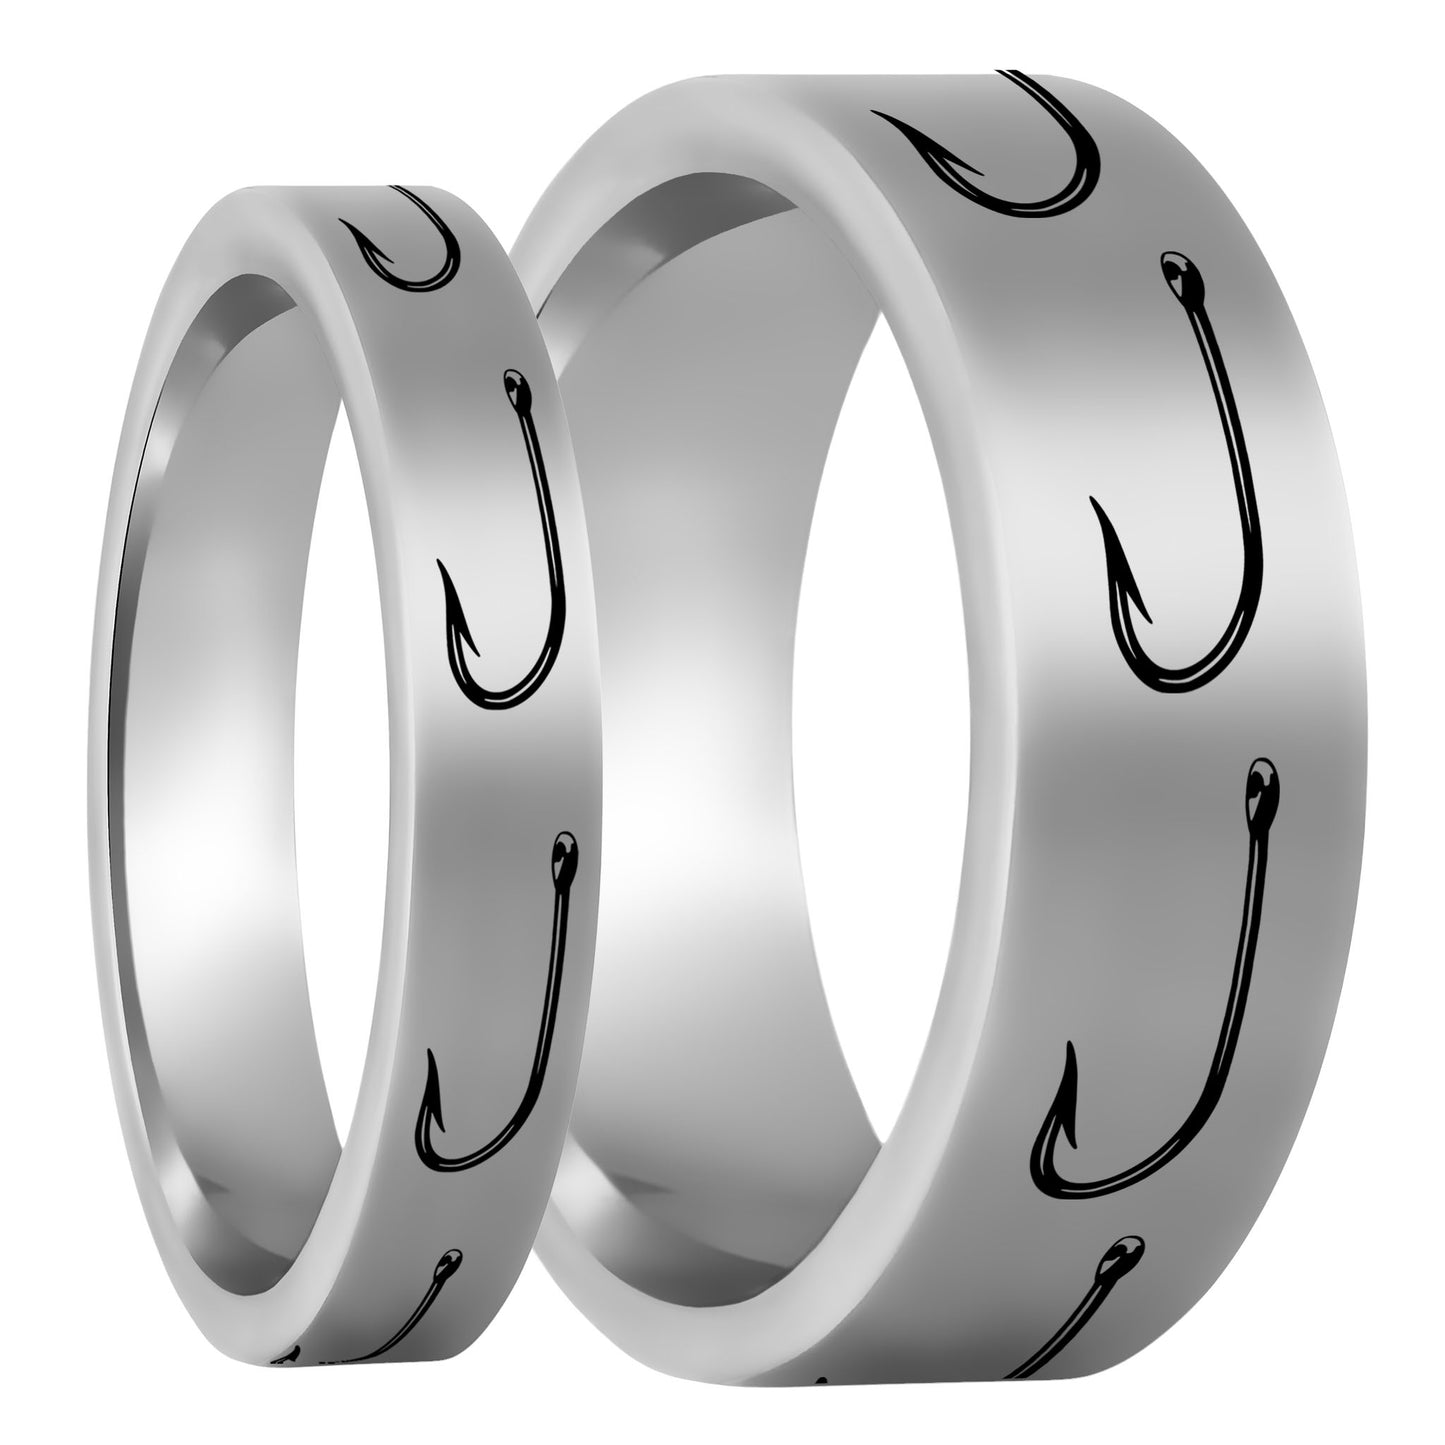 One Fishing Hook Tungsten Couple's Matching Wedding Band Set displayed on a plain white background